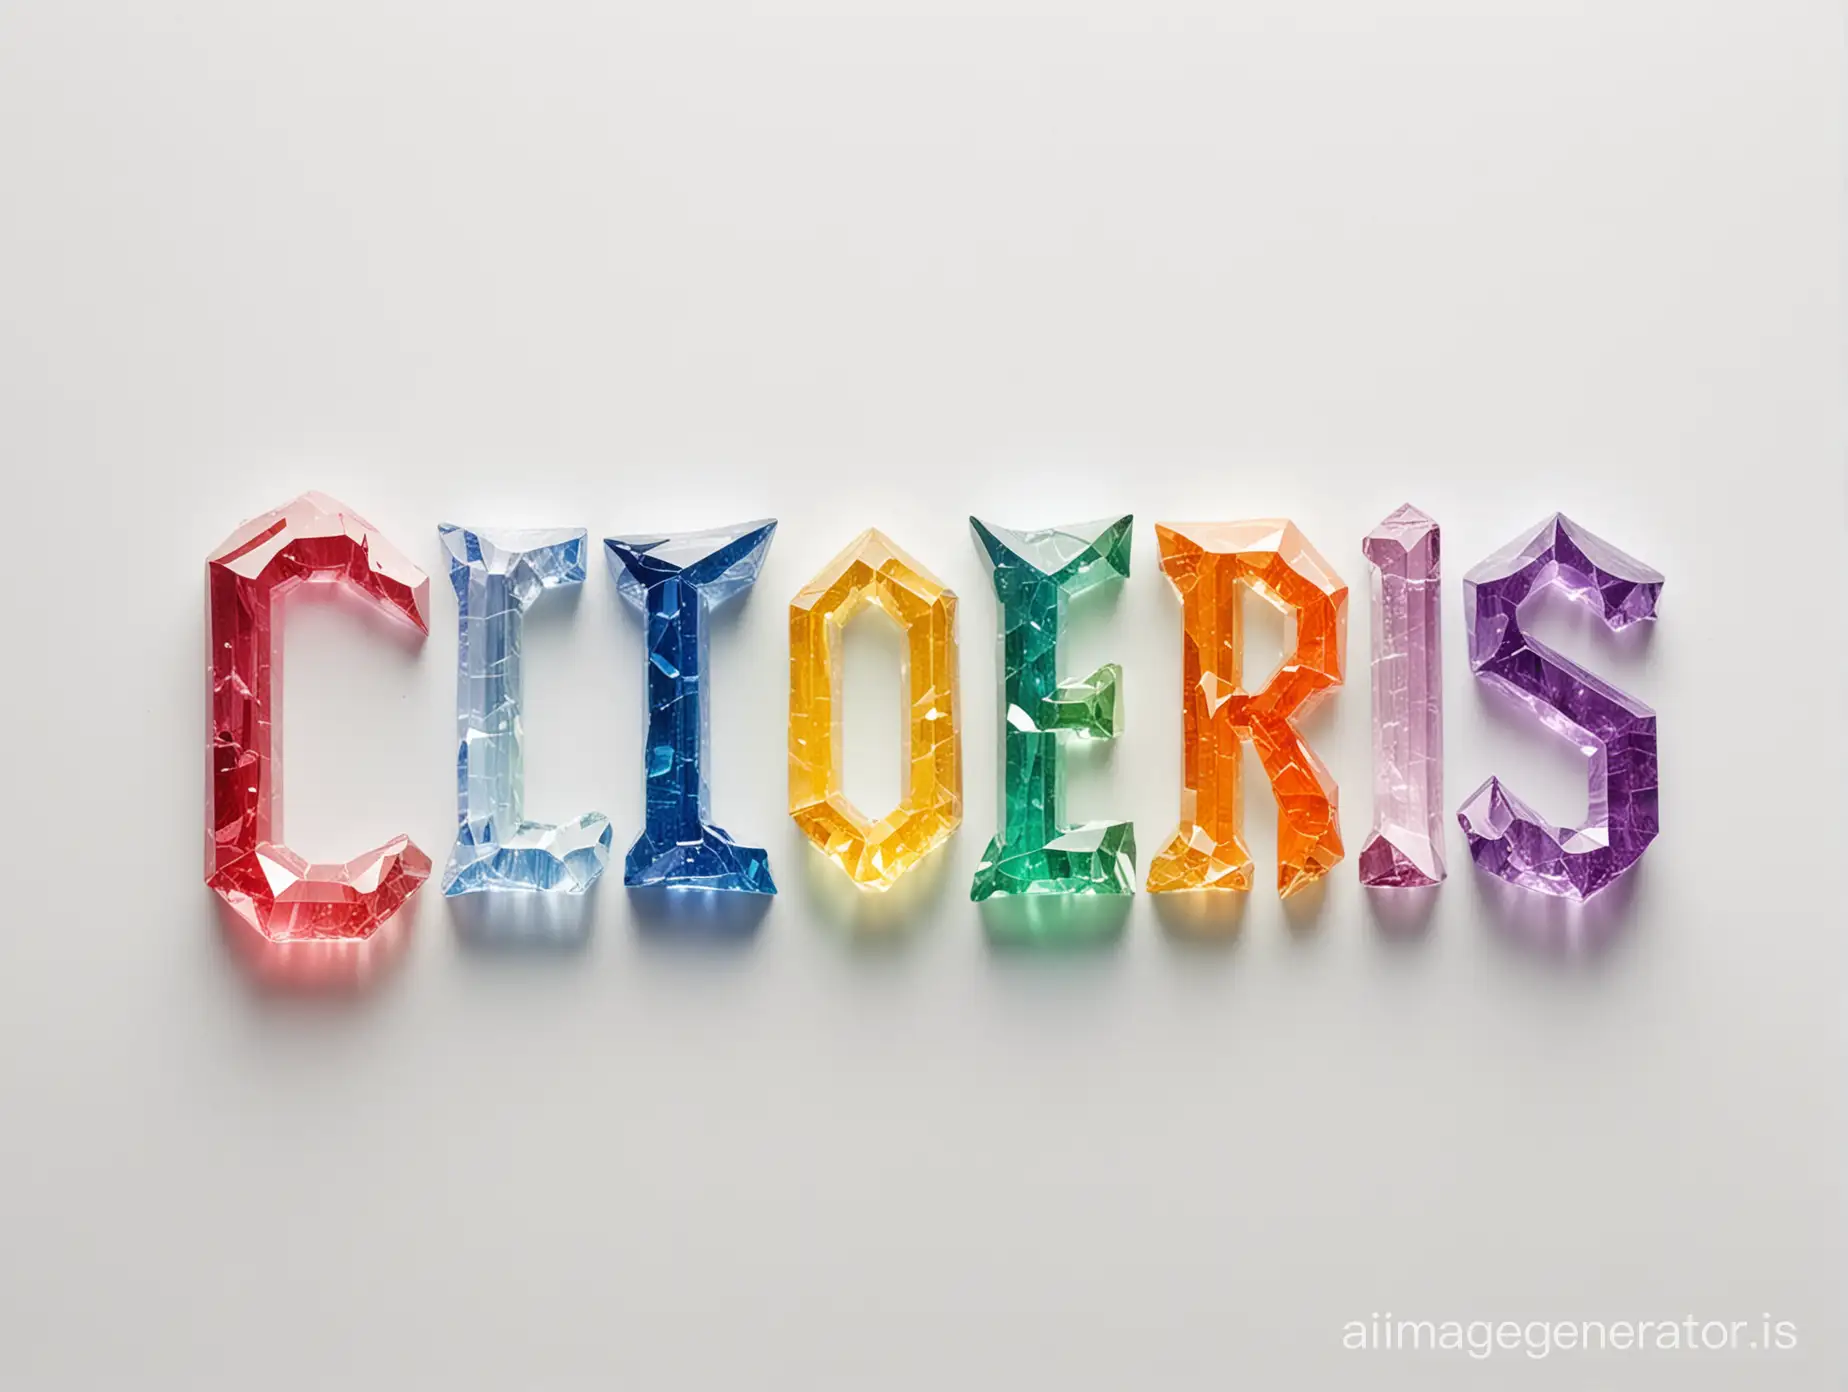 write exactly word "COLORS" looks like crystals on white background